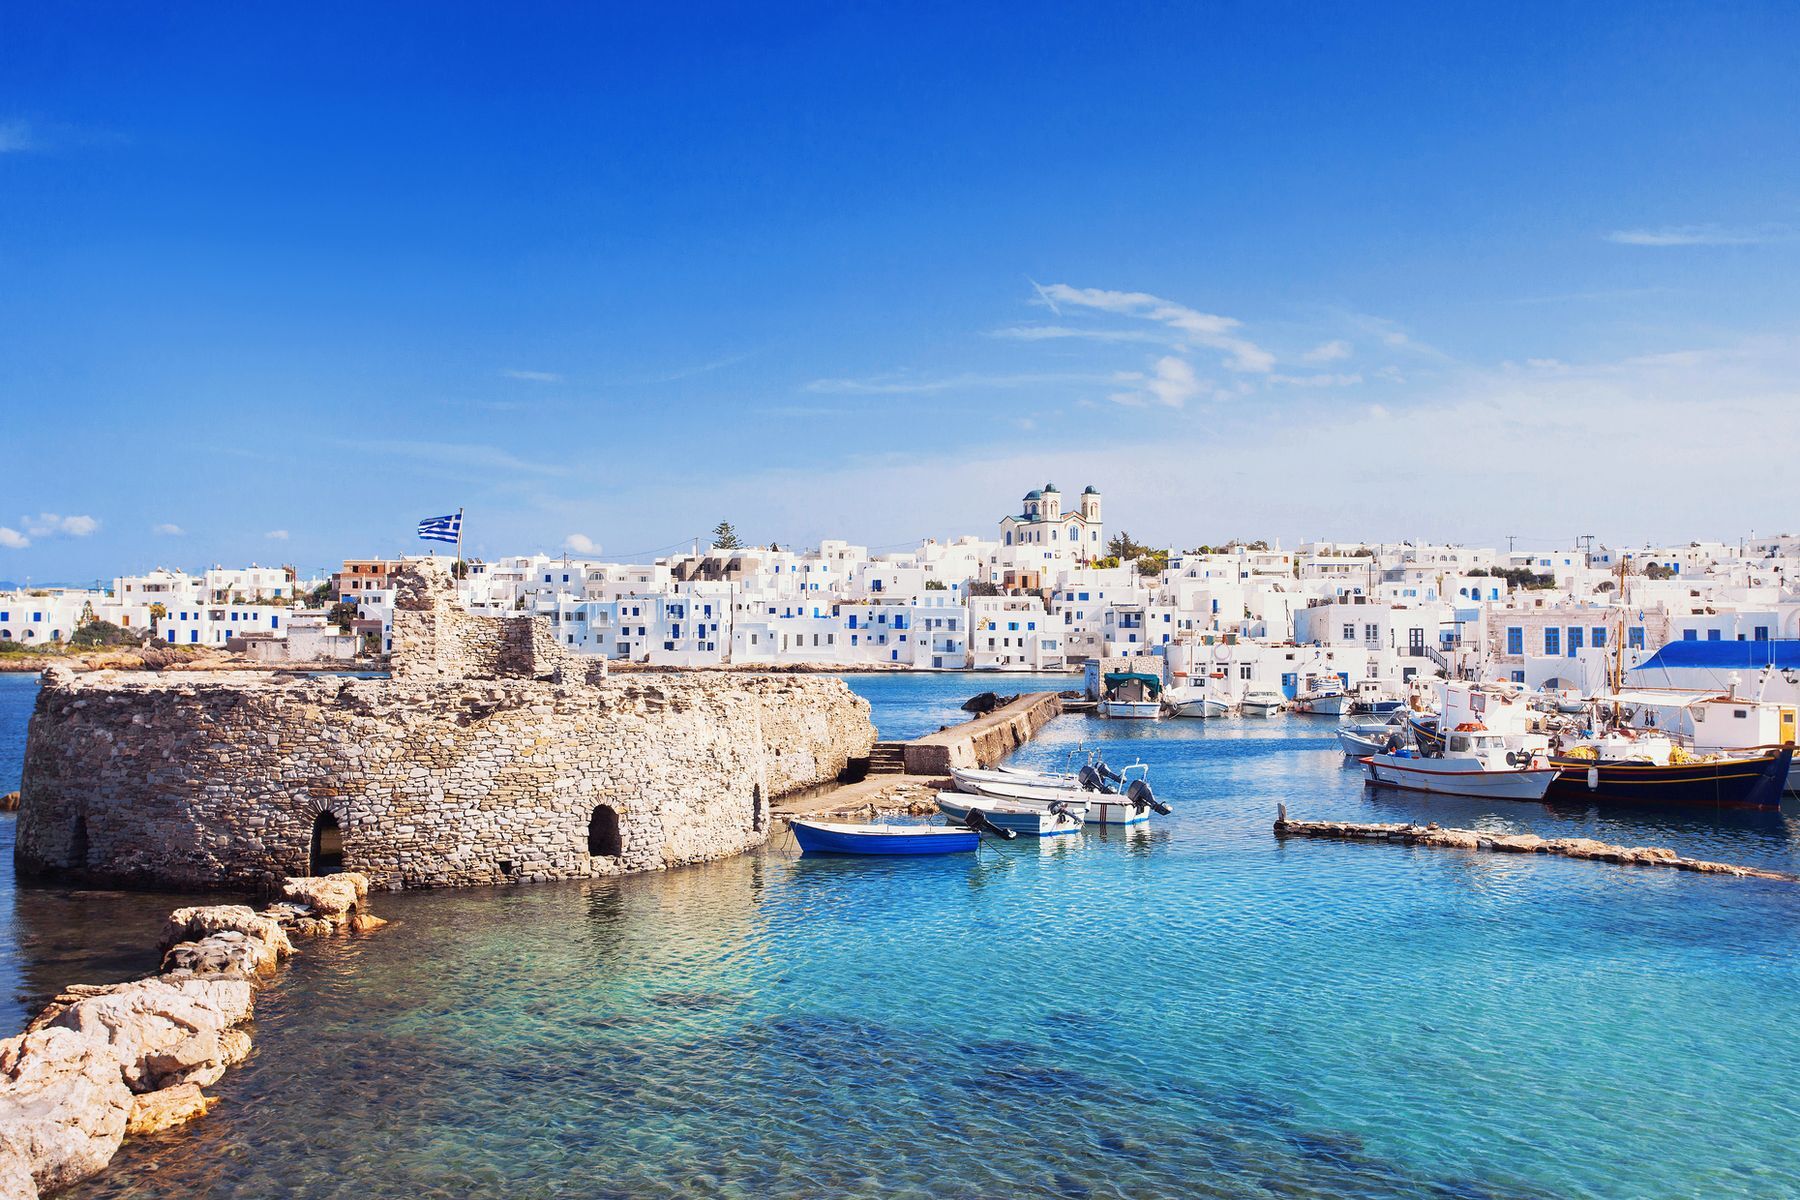 With picturesque villages and pristine beaches, the classically Greek <a href="https://www.discovergreece.com/cyclades/paros" rel="noreferrer noopener">Paros</a> tends to be less crowded and less expensive than other <a href="https://www.visitgreece.gr/islands/cyclades/" rel="noreferrer noopener">Cyclades</a> islands, yet offers just as much to see and do. Stop by <a href="https://naoussaparos.com/" rel="noreferrer noopener">Naoussa</a> to ramble through the winding streets of its Venetian port, then head to Parikia to visit its <a href="https://archaeologicalmuseums.gr/en/museum/5df34af3deca5e2d79e8c198/archaeological-museum-of-paros" rel="noreferrer noopener">archaeological museum</a>, filled with the splendour of ancient Greece. For a bit of relaxation, check out the wind-sculpted rocks at Kolymbithres <a href="https://www.discovergreece.com/travel-ideas/best-of/12-best-beaches-paros" rel="noreferrer noopener">Beach</a>, while water sports enthusiasts will want to make their way to Golden Beach.